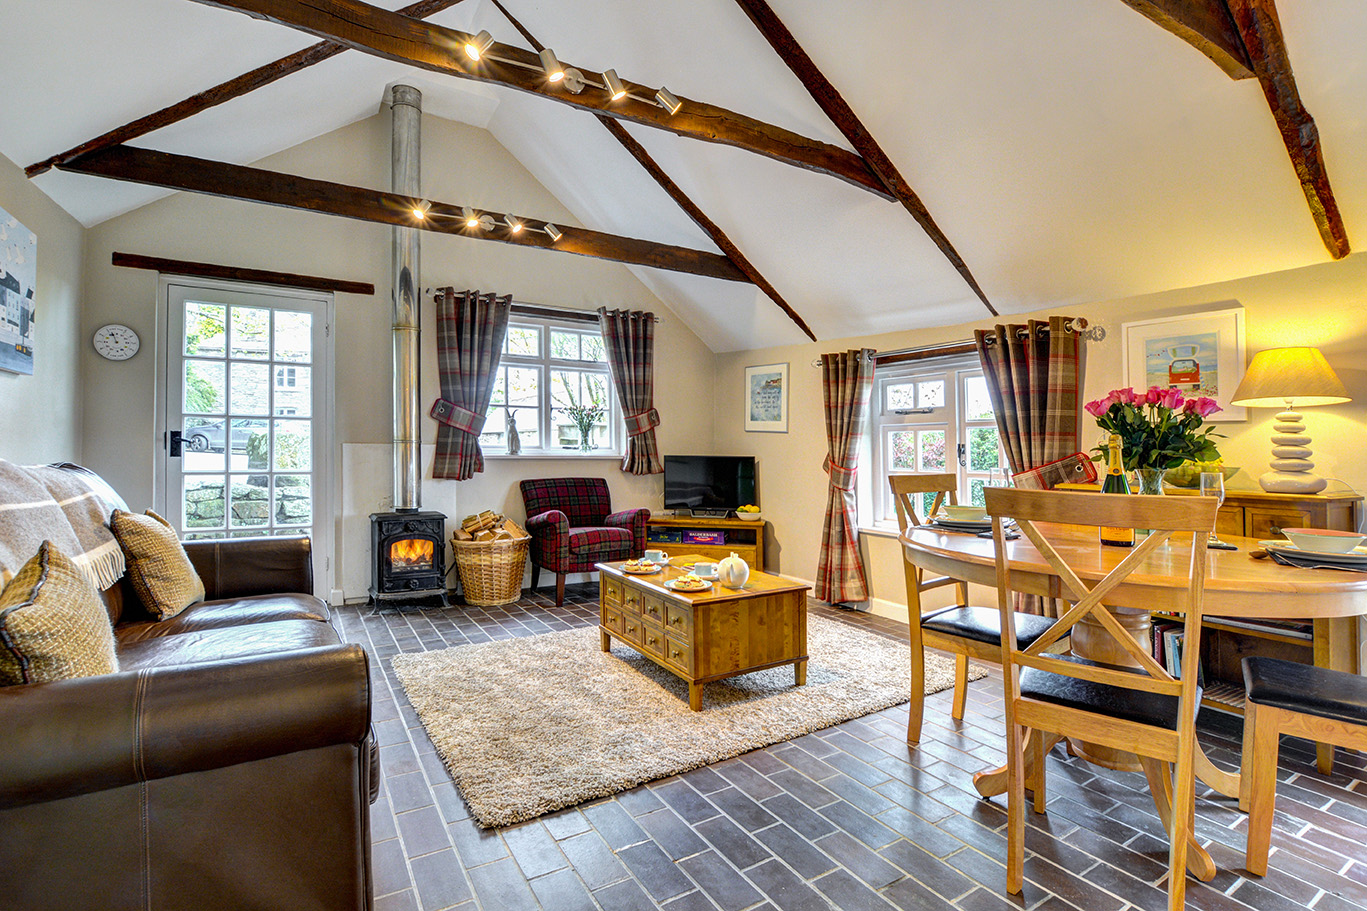 The lounge and dining area of The Linney self catering cottage converted barn at Penrose Burden holiday cottages in Cornwall.jpg